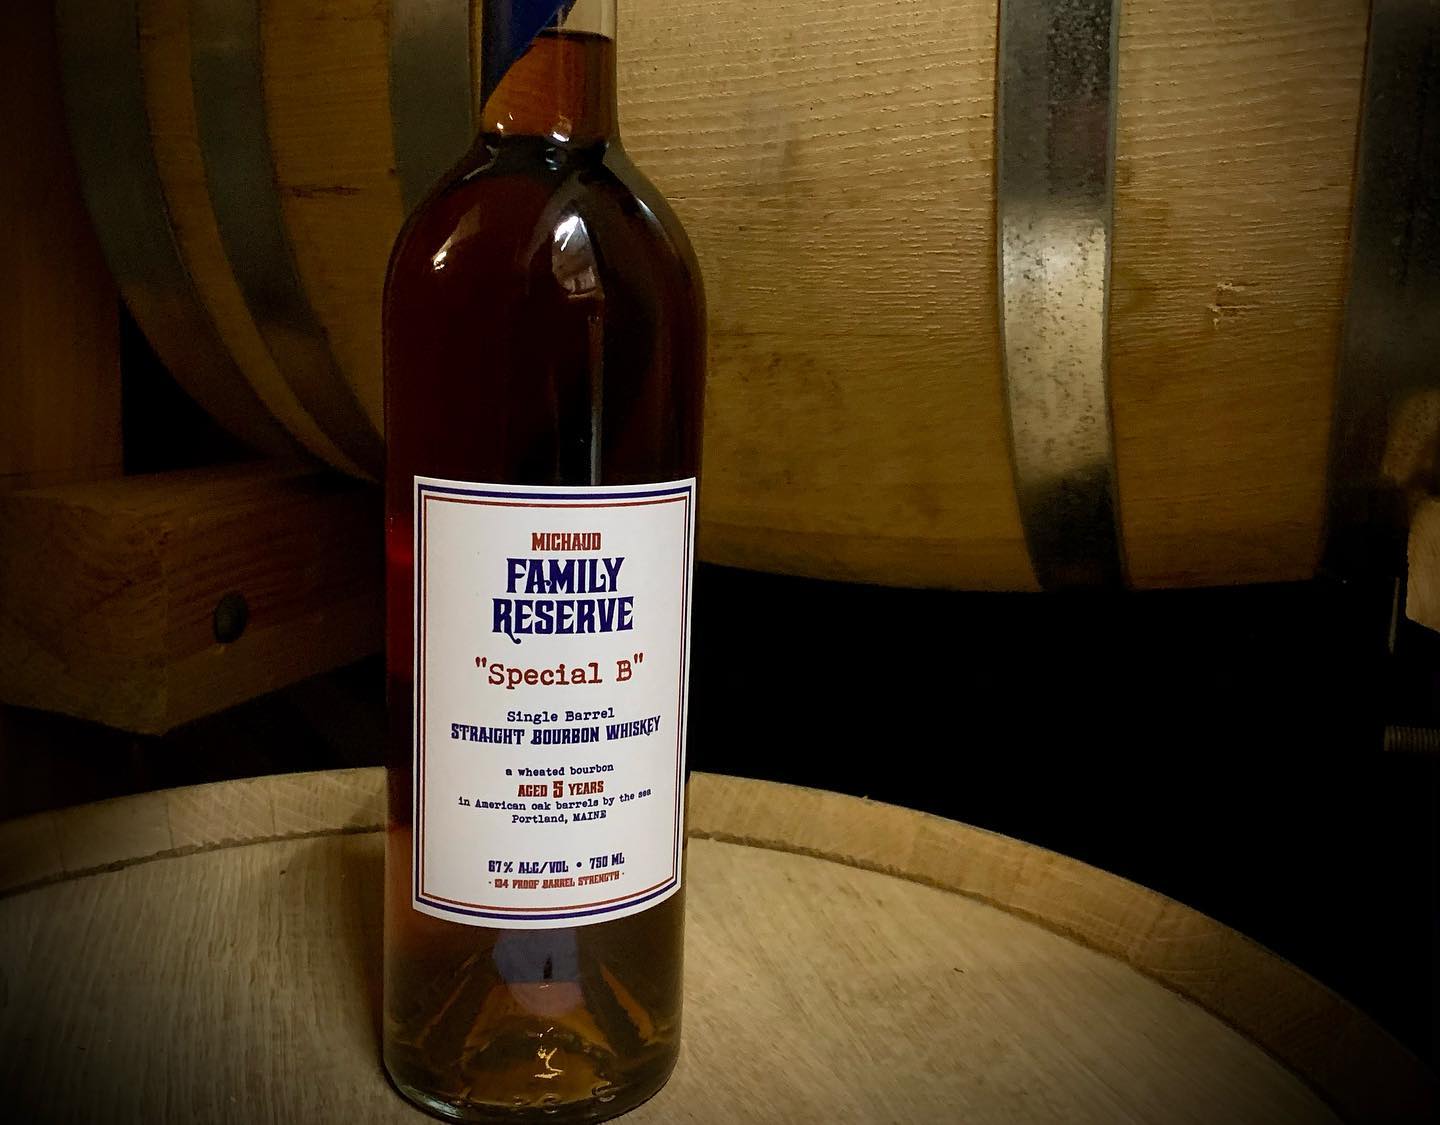 Family Reserve "Special B" Straight Bourbon